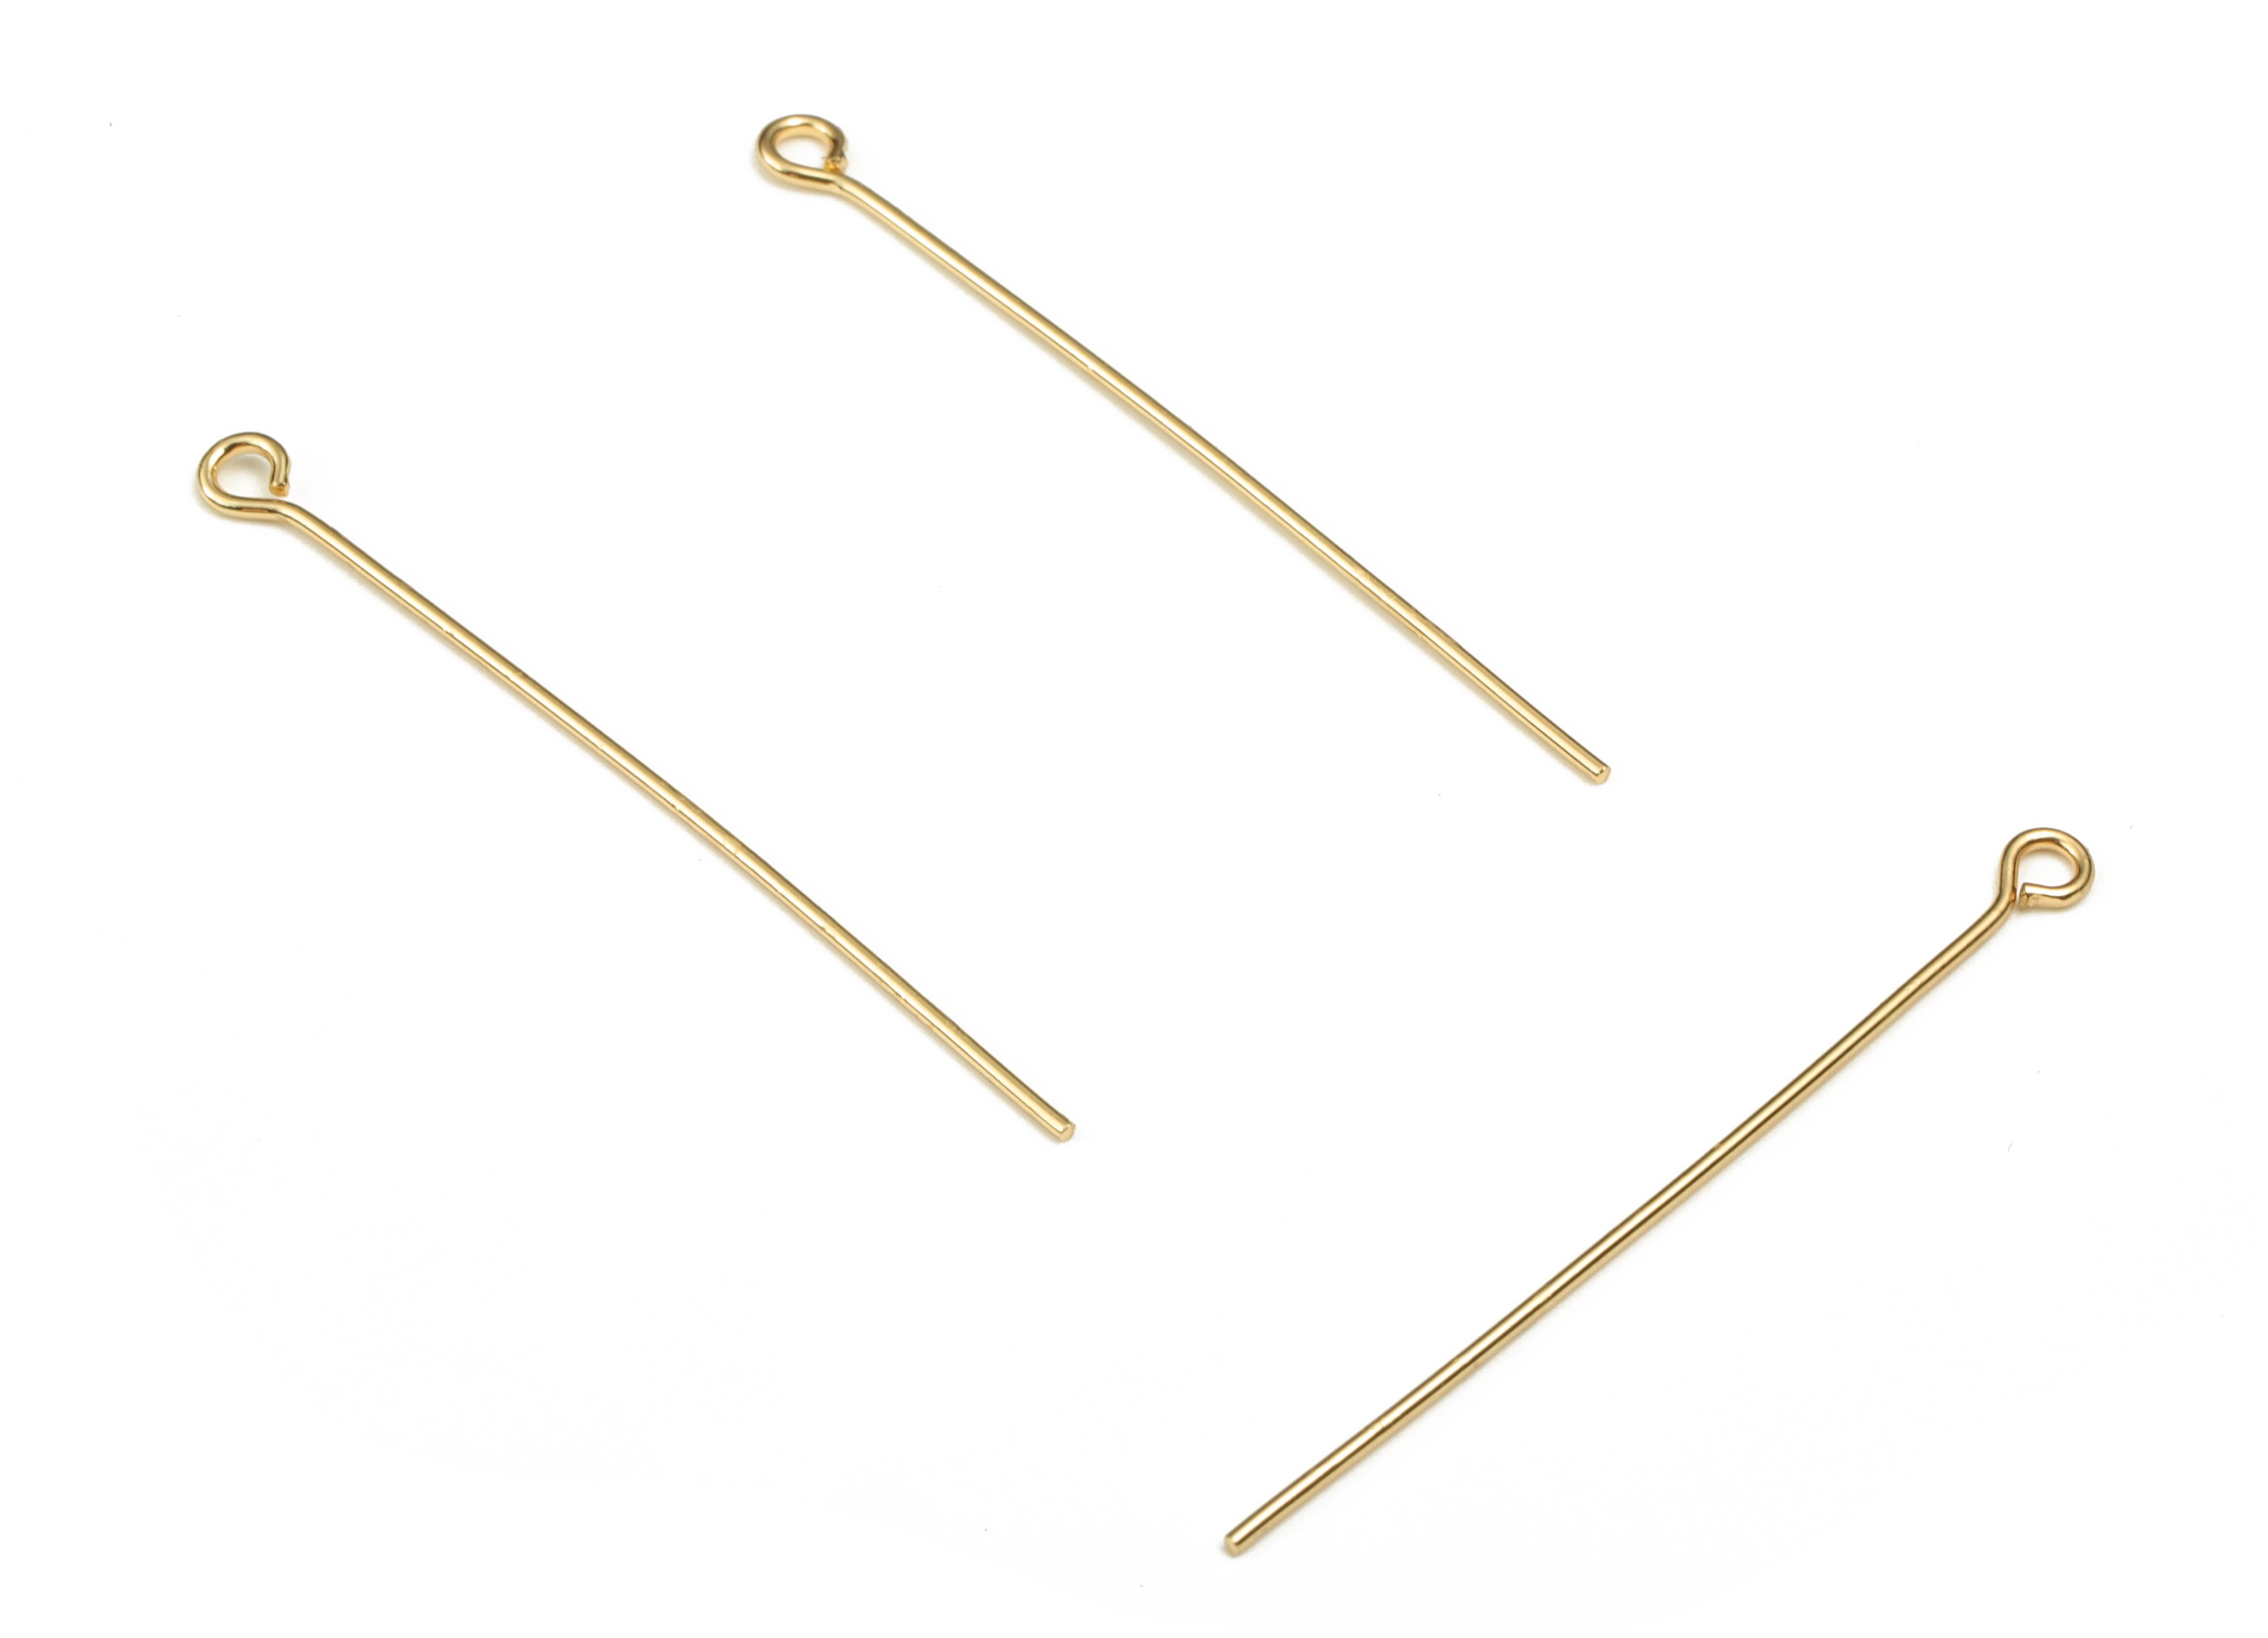 500 14k Gold T Pin Flat Head Pin Straight Pins Gauge 22 Delicate Component  Jewelry Finding 25mm 30mm 35mm 40mm 50mm 55mm 